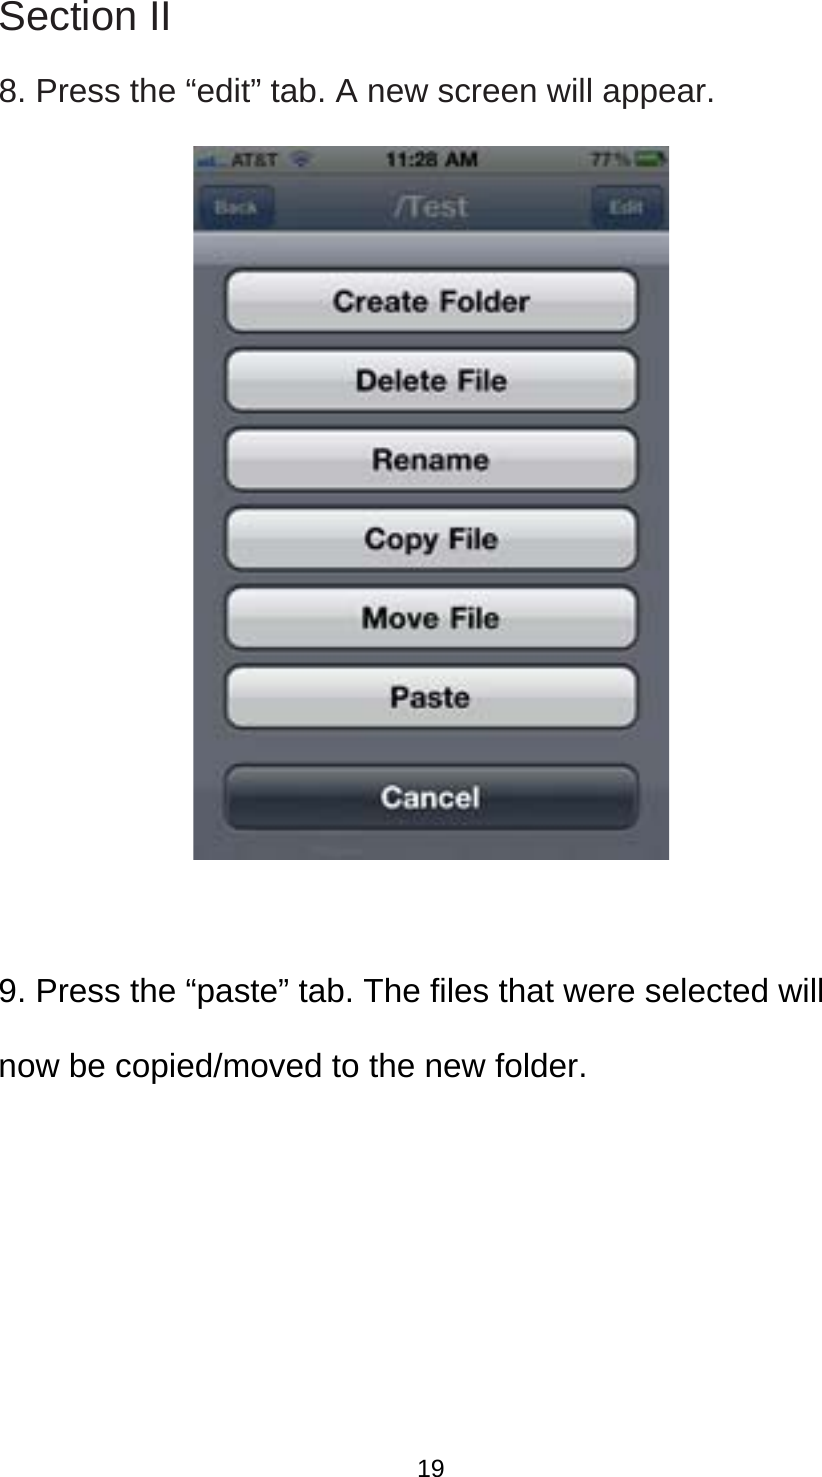 Section II 8. Press the “edit” tab. A new screen will appear.     9. Press the “paste” tab. The files that were selected will now be copied/moved to the new folder.      19